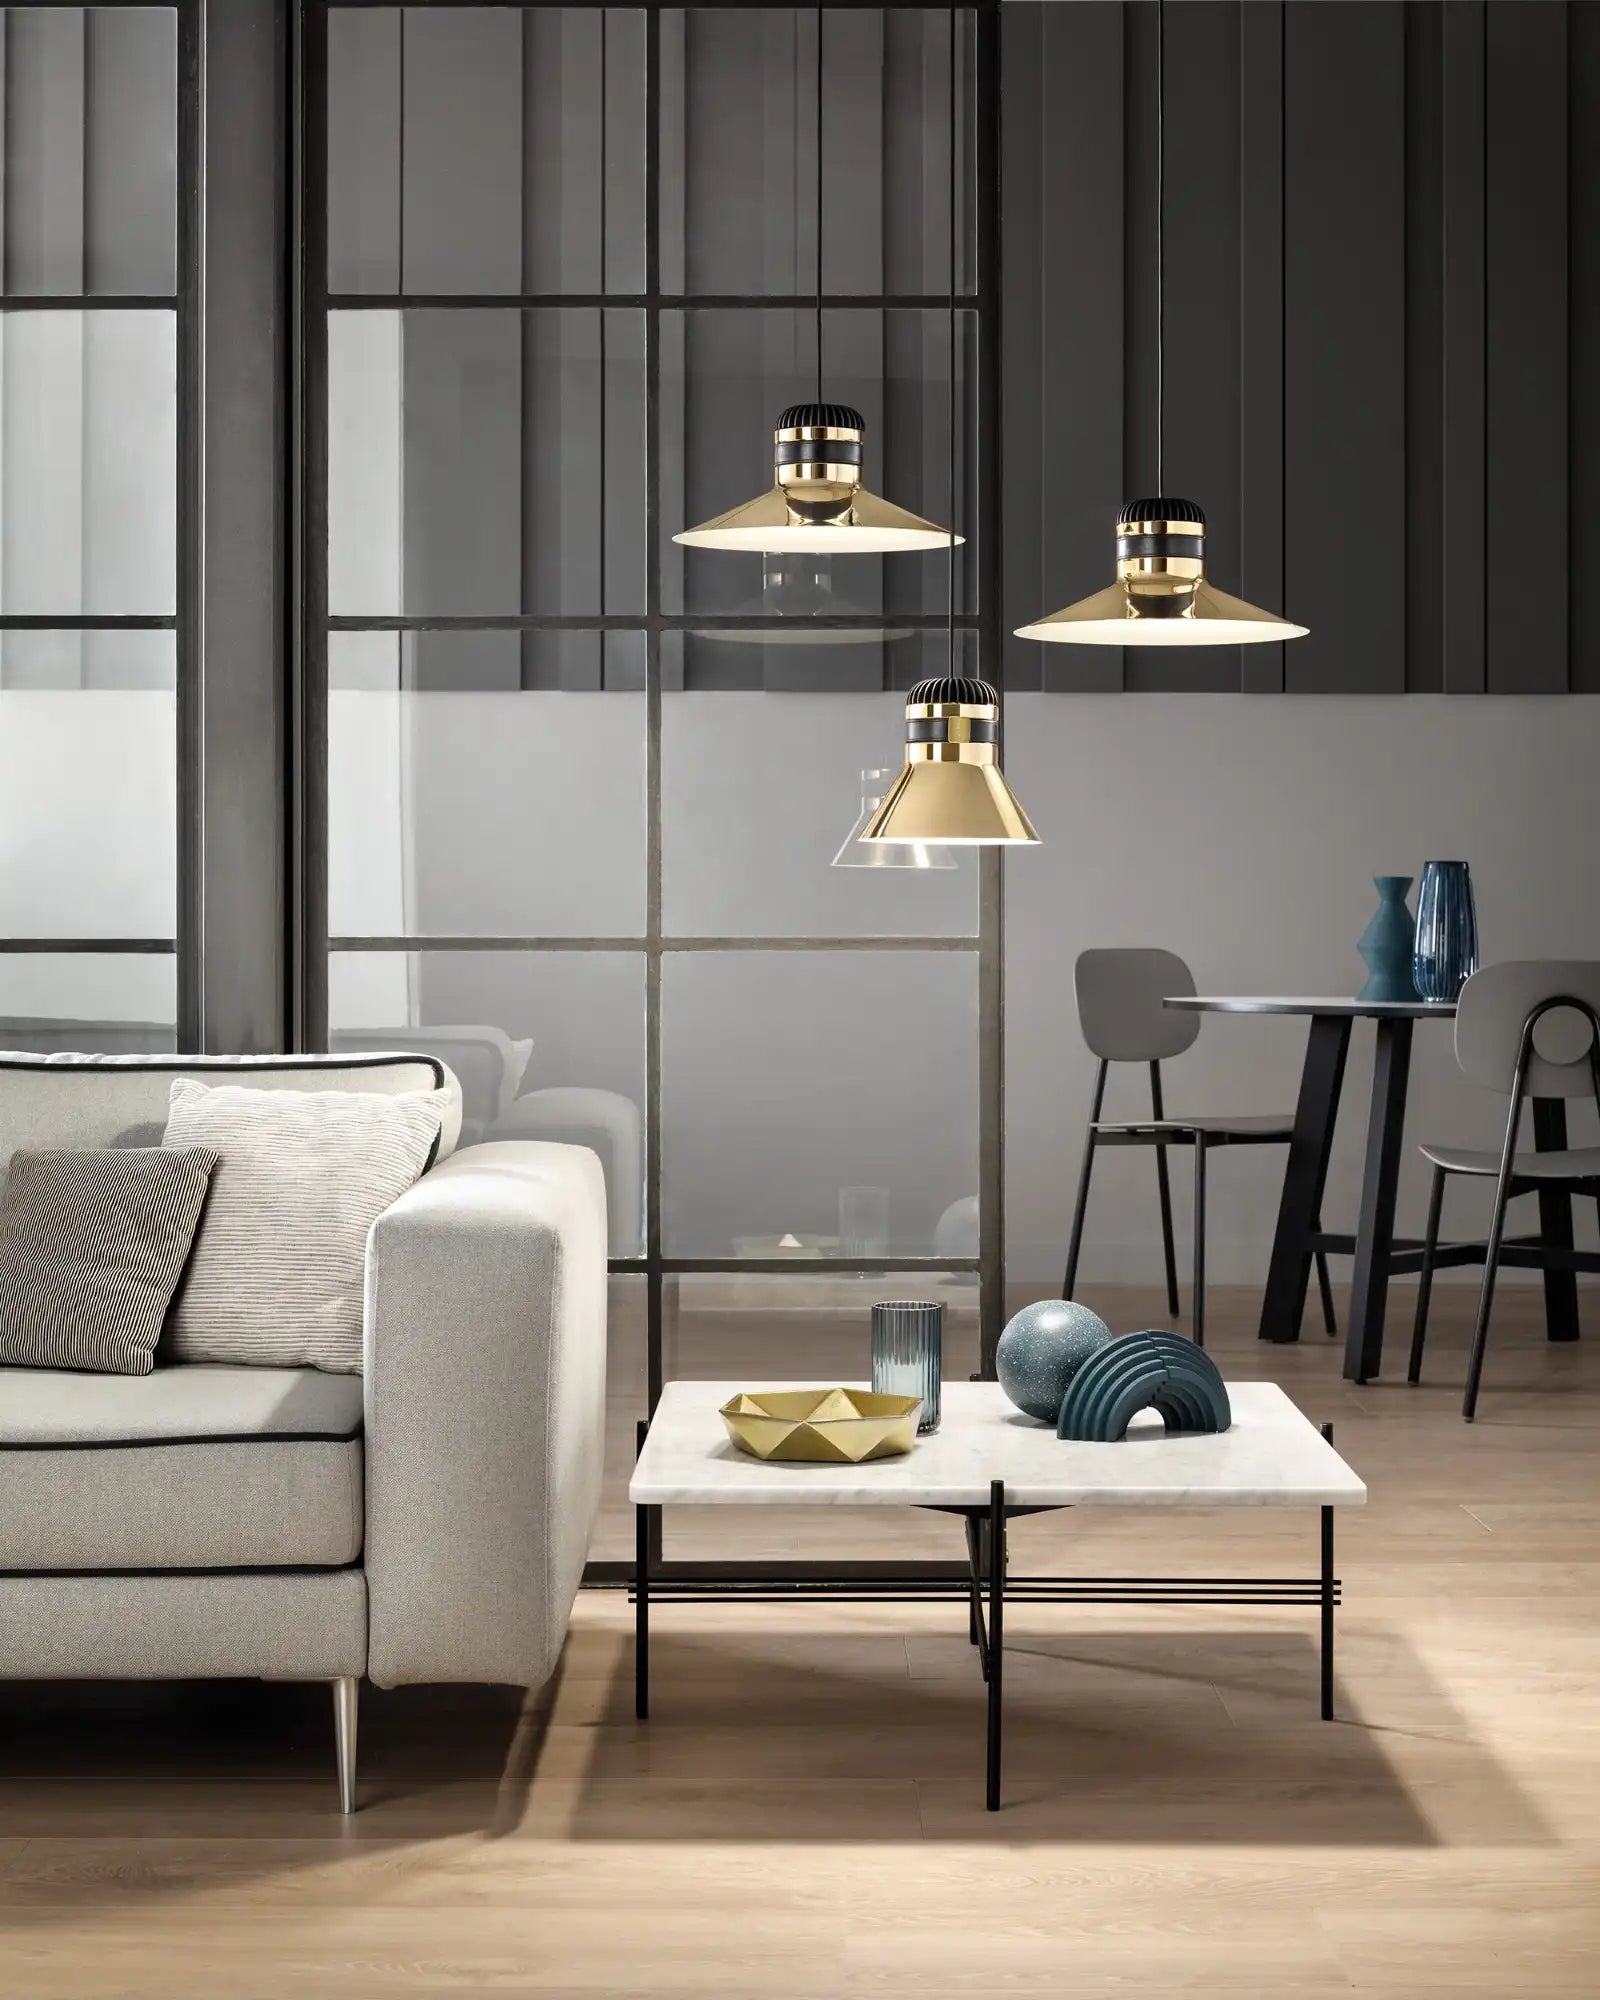 Cordea Pendant Light by Masiero Lighting featured within a modern living room | Nook Collections